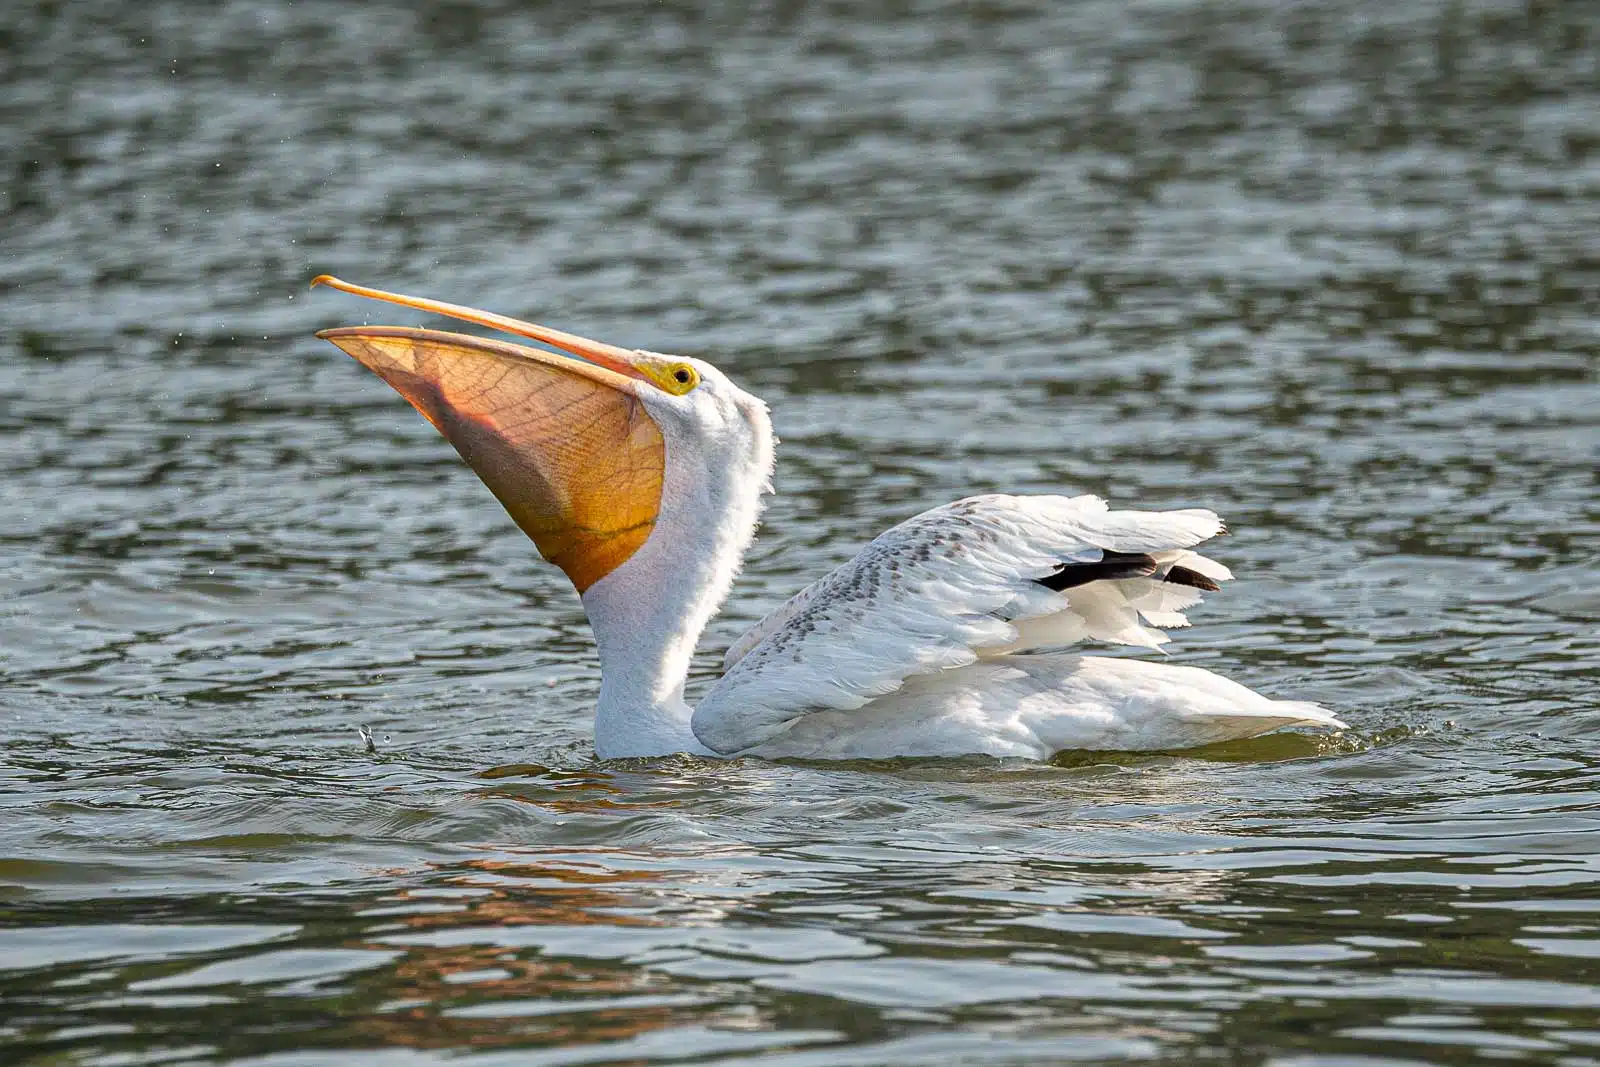 A pelican swallows a fish while on a lake in Manitoba.